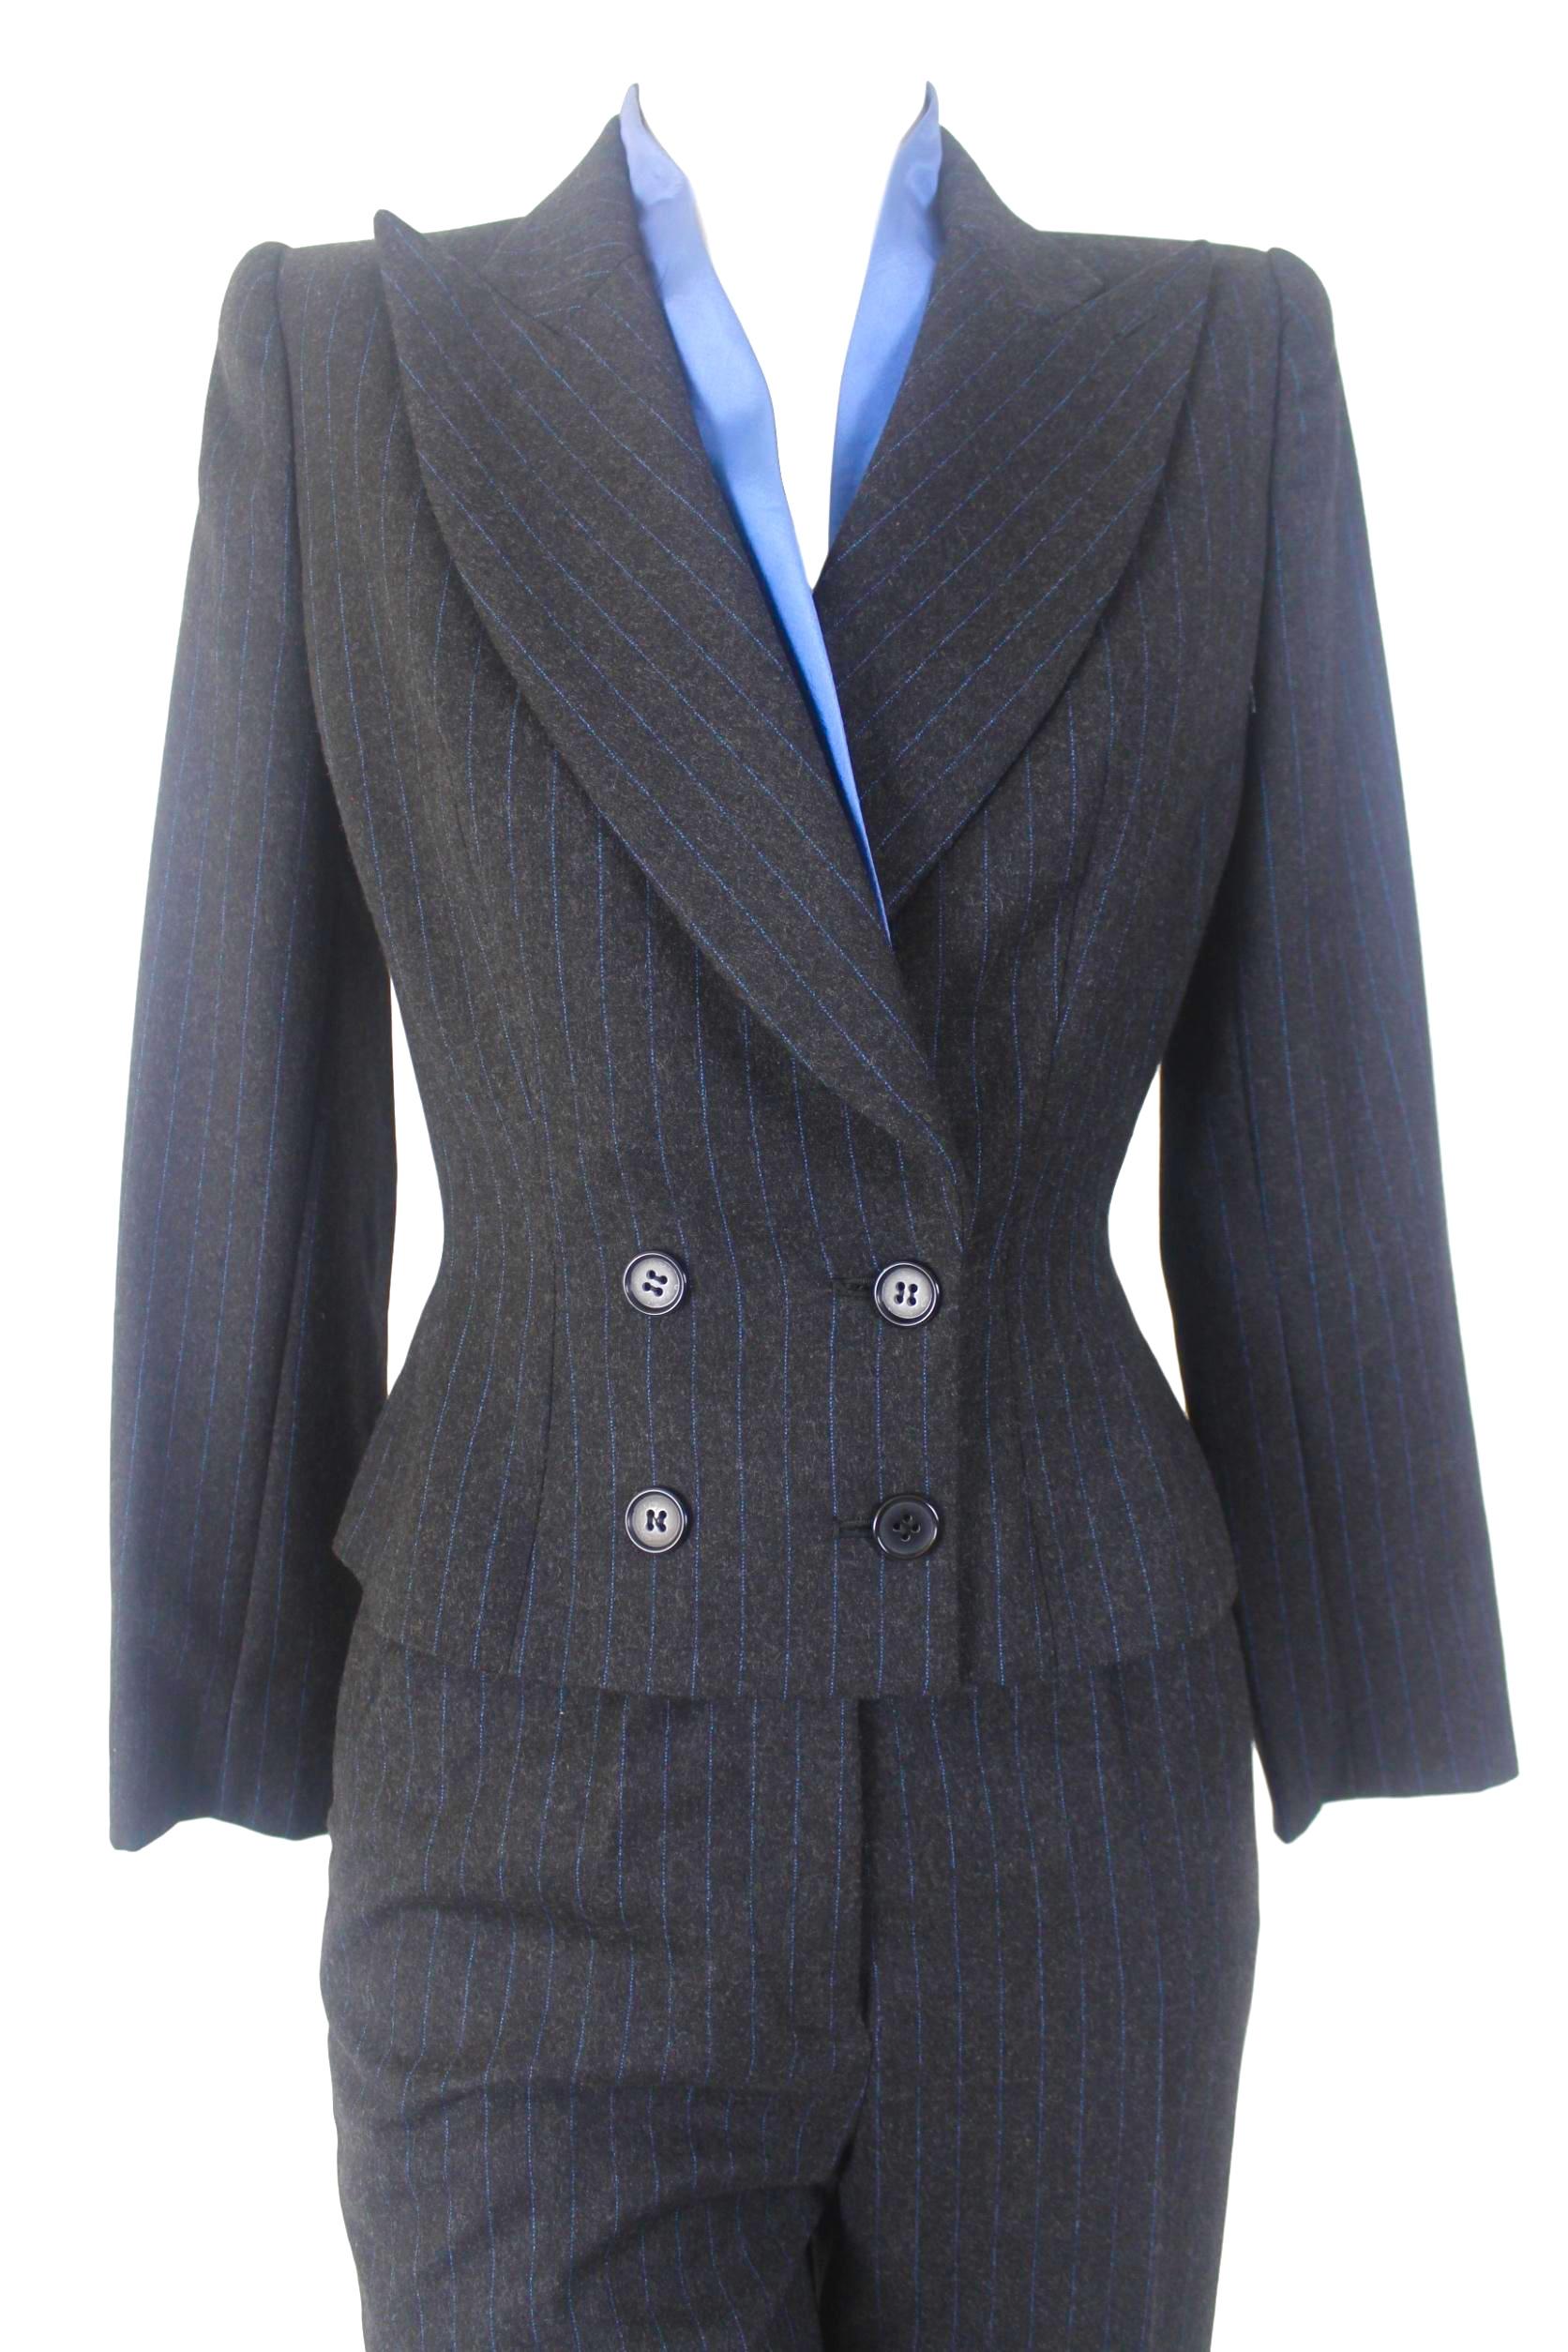 Women's or Men's Alexander McQueen Pinstripe Blue Satin Lined Suit Fall 1997 Collection